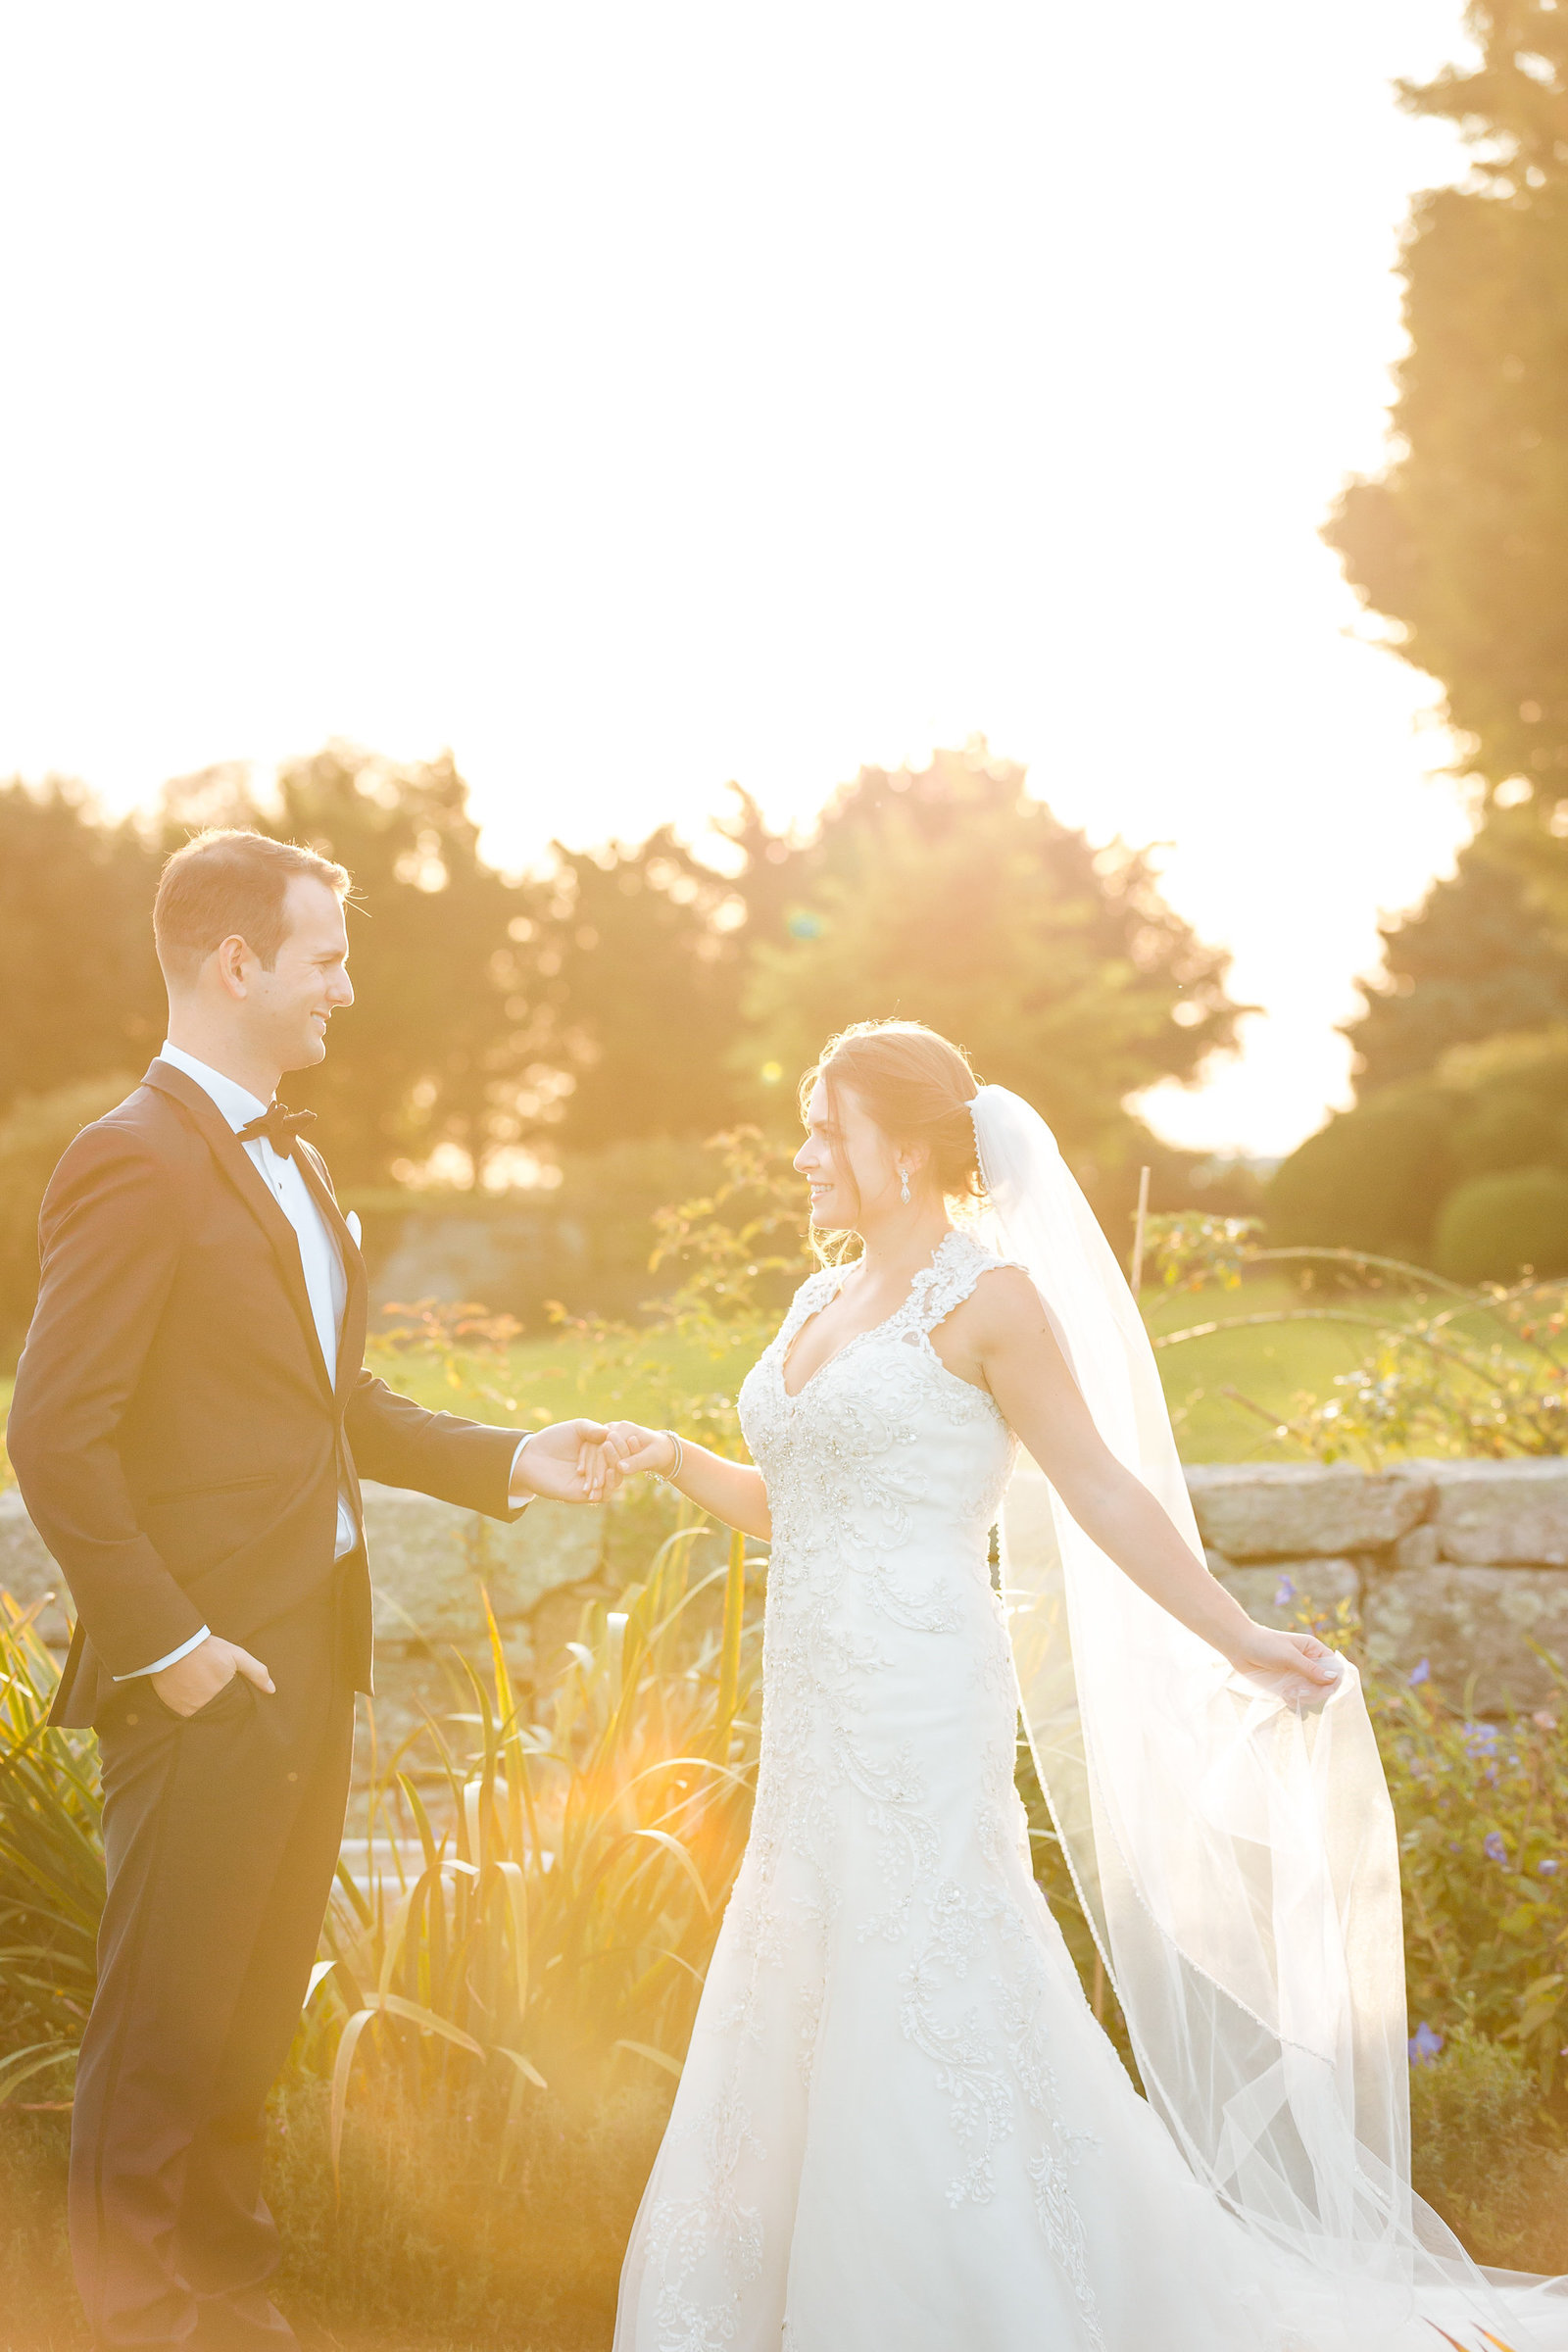 Magic Hour Eolia Mansion Wedding in Connecticut by Jamerlyn Brown Photography